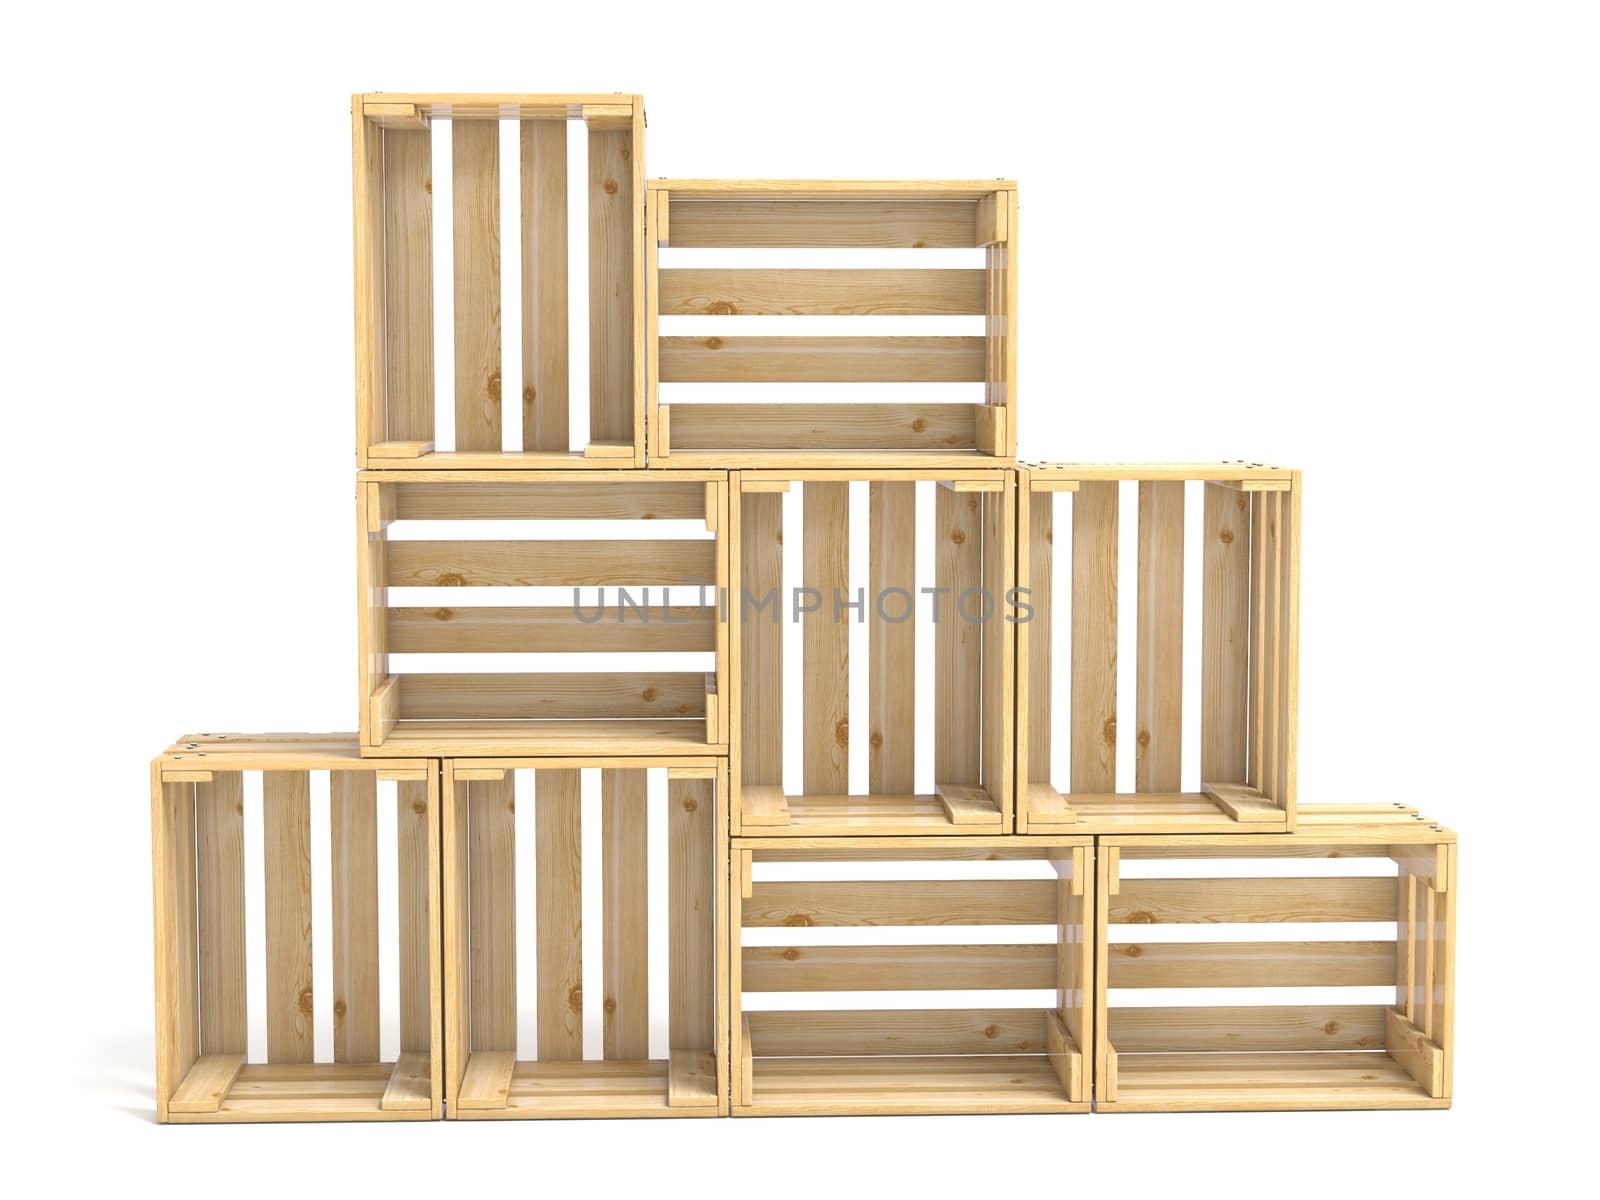 Empty wooden crates arranged 3D by djmilic